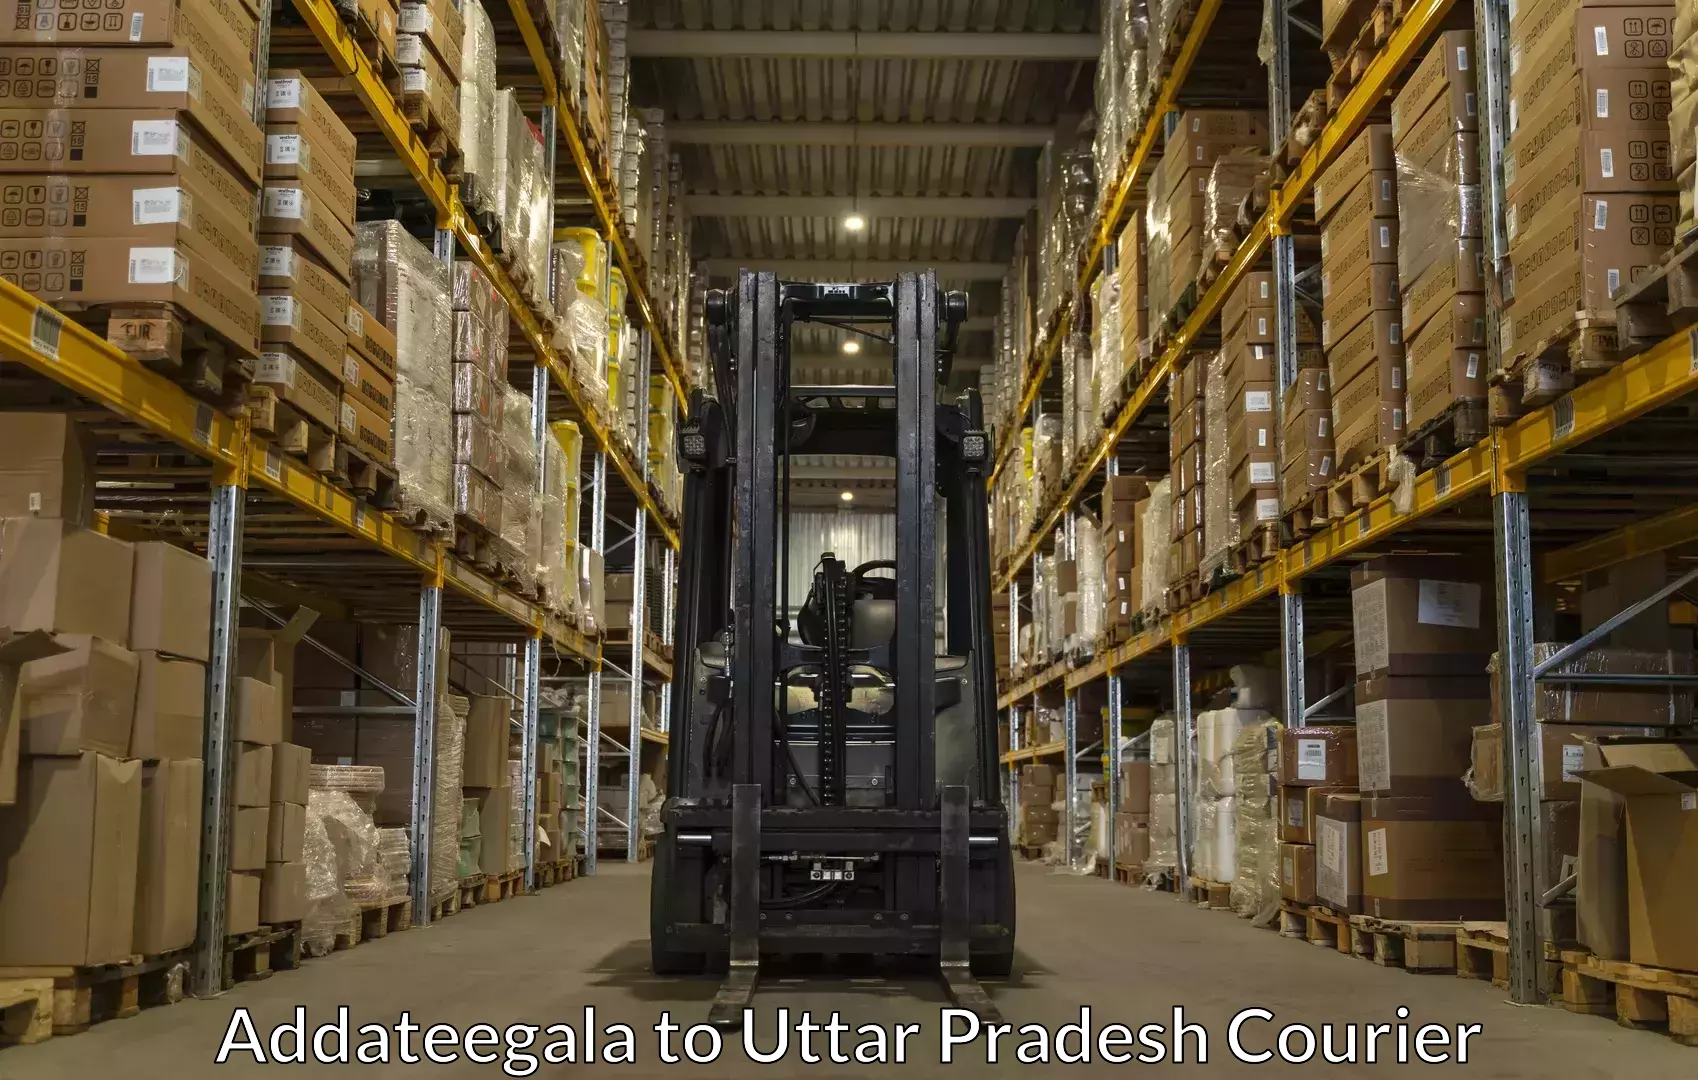 Home moving specialists Addateegala to Uttar Pradesh